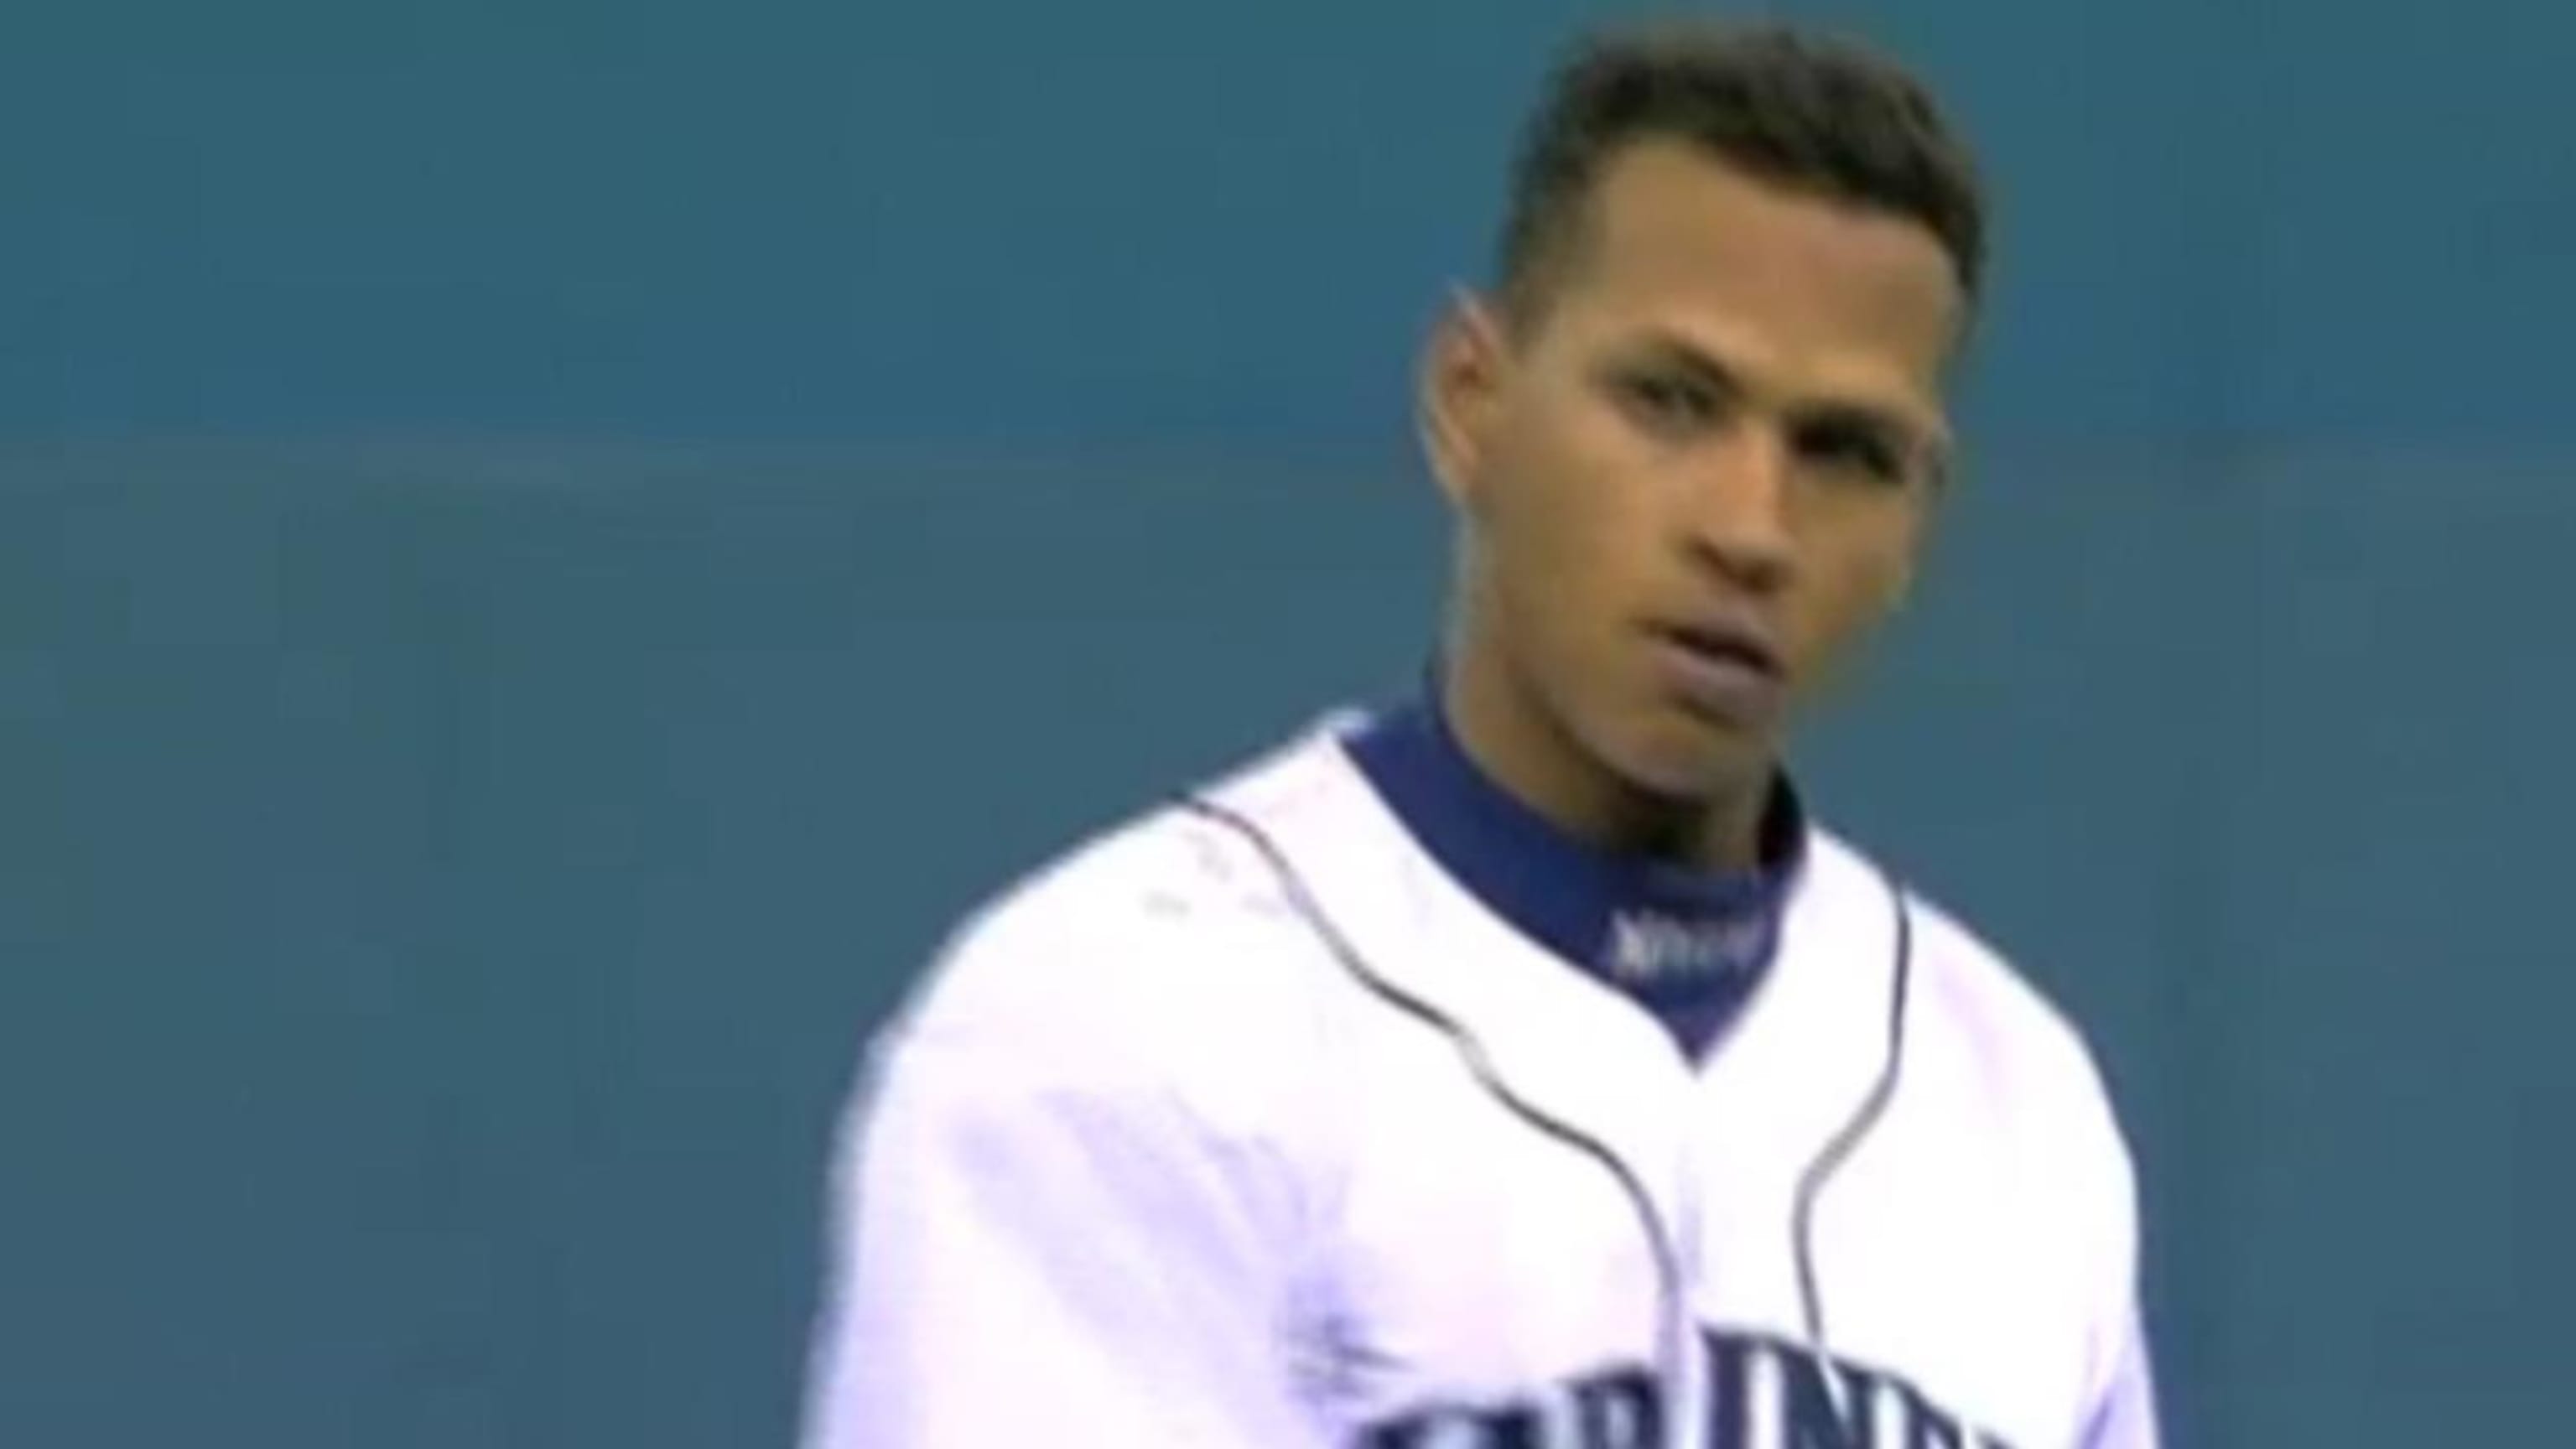 Alex Rodriguez 1996 season with Mariners among best